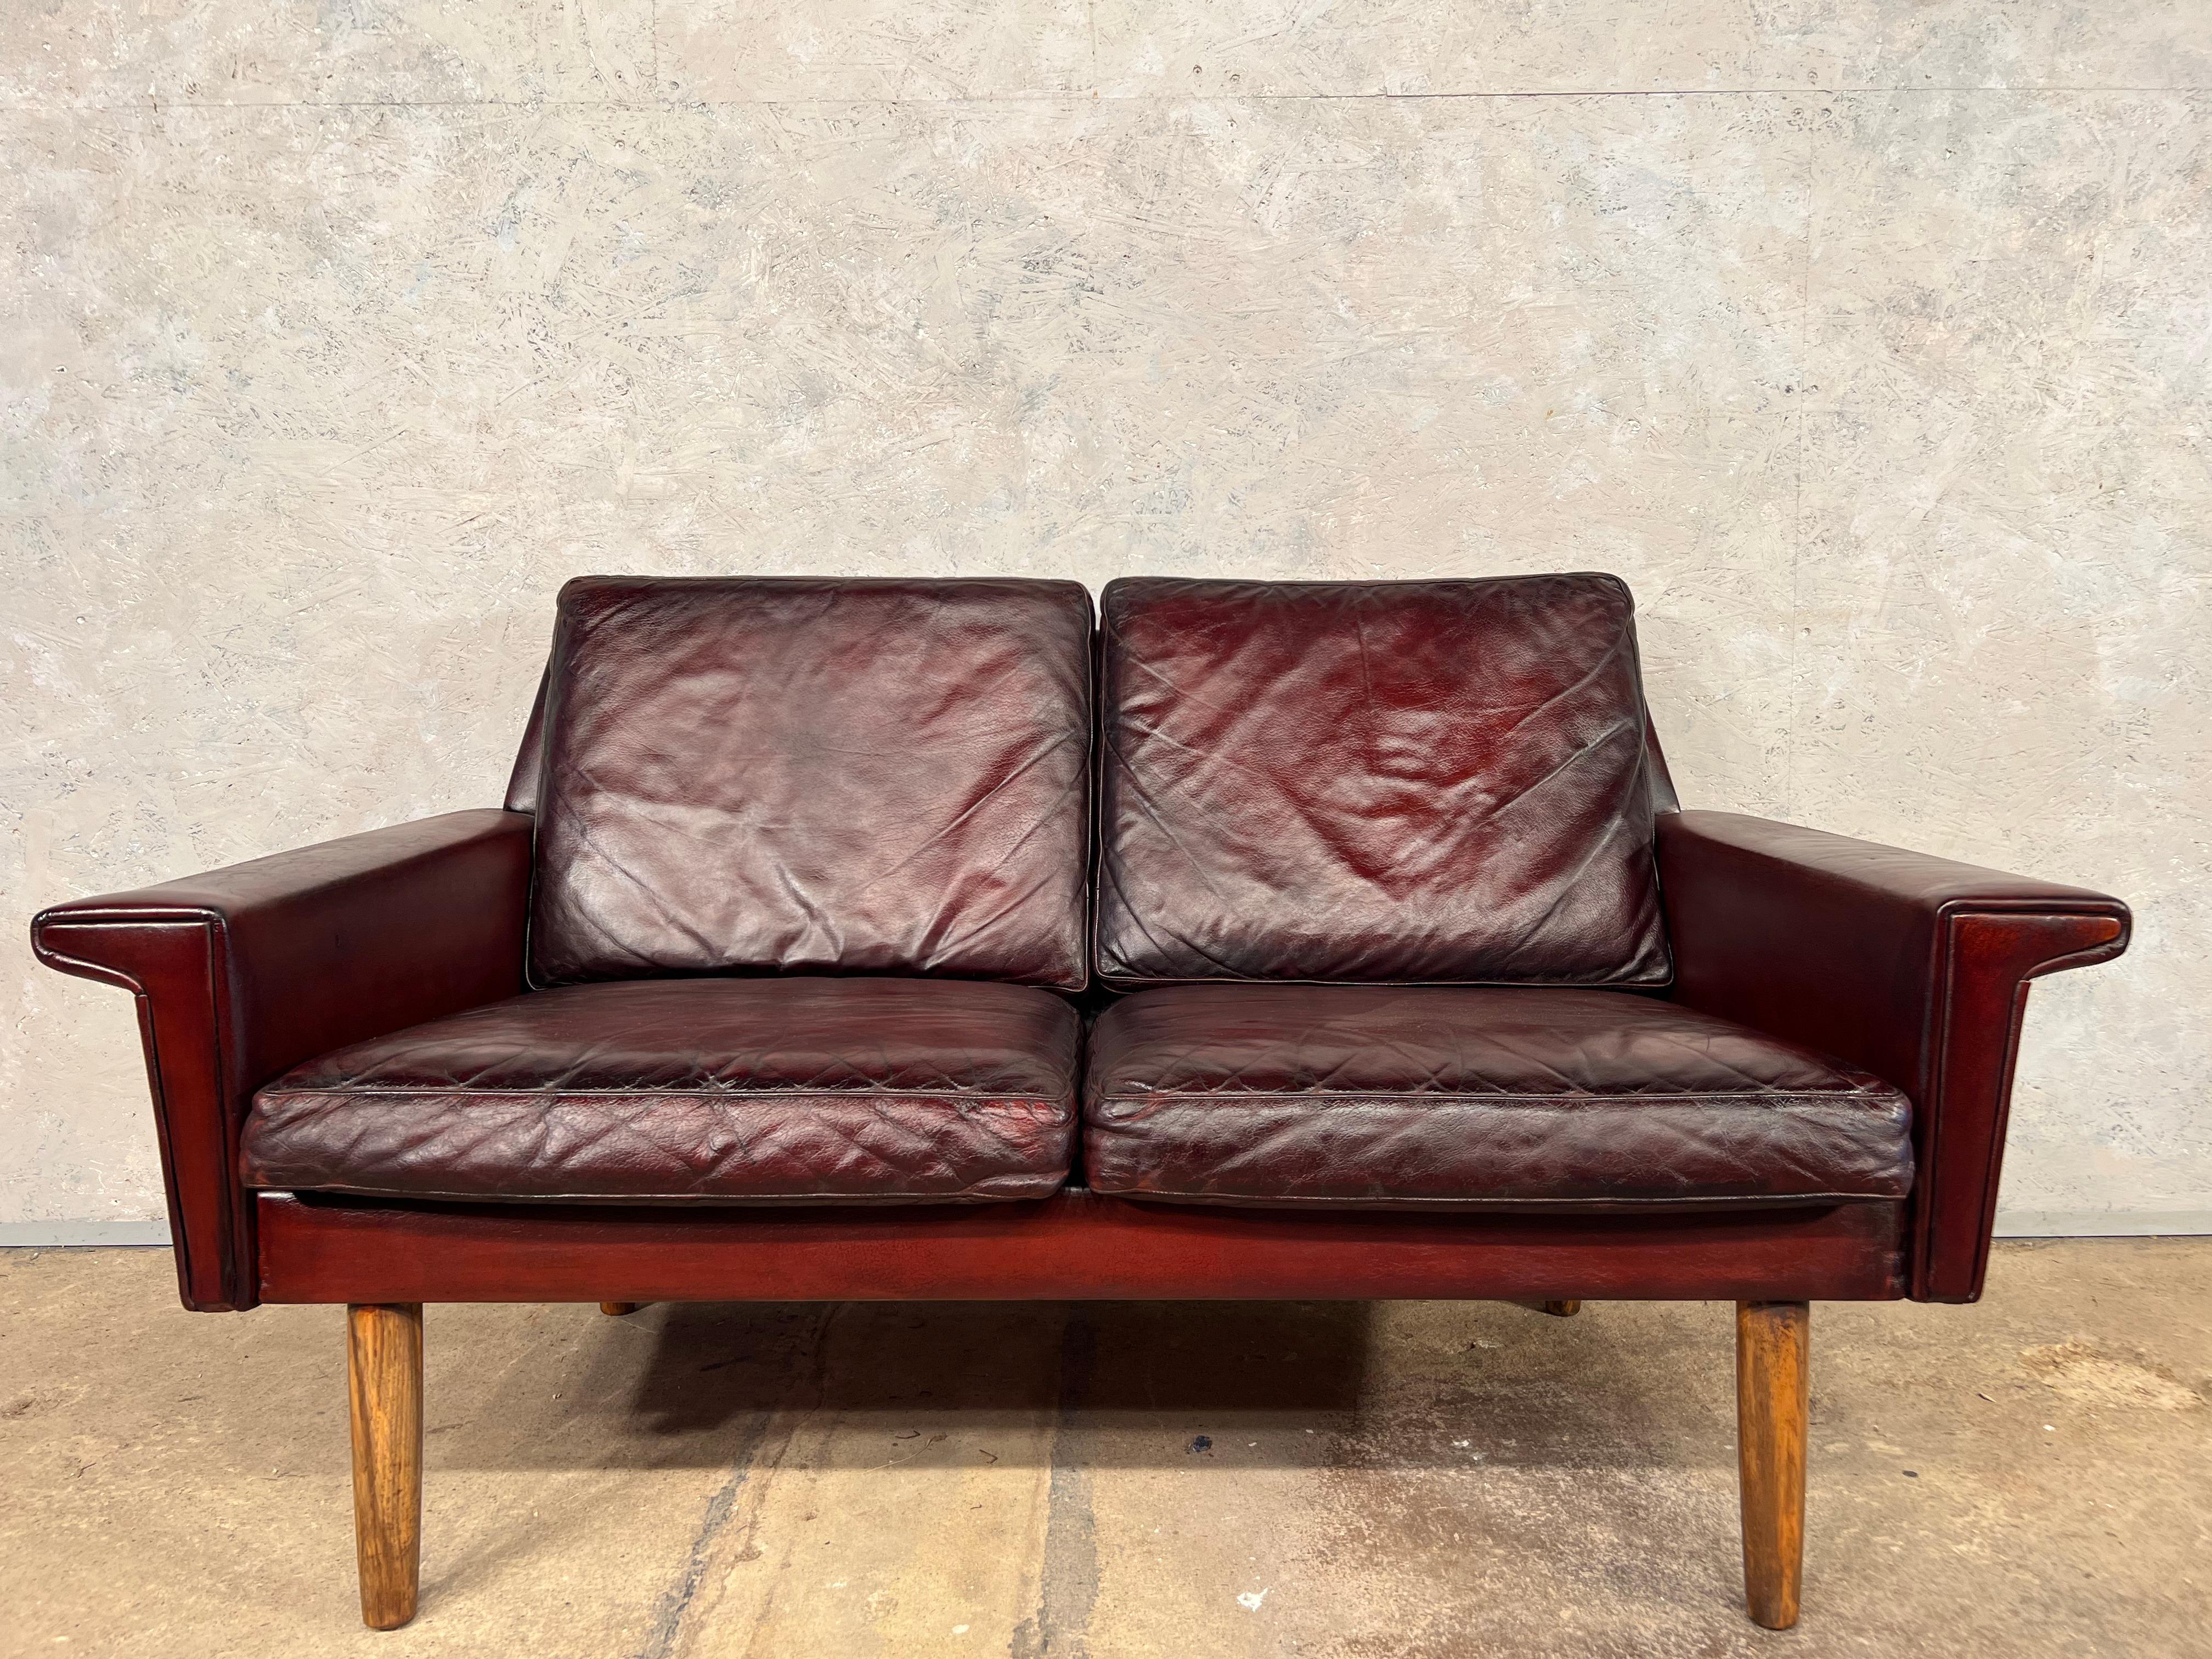 A Stylish Early 1970s Sofa by Svend Skipper Denmark . great design with beautiful lines, it sits wonderfully. Small and neat proportions with a deep seat, very comfortable.

A Stunning deep Cherry colour, with great patina and finish. Resting on